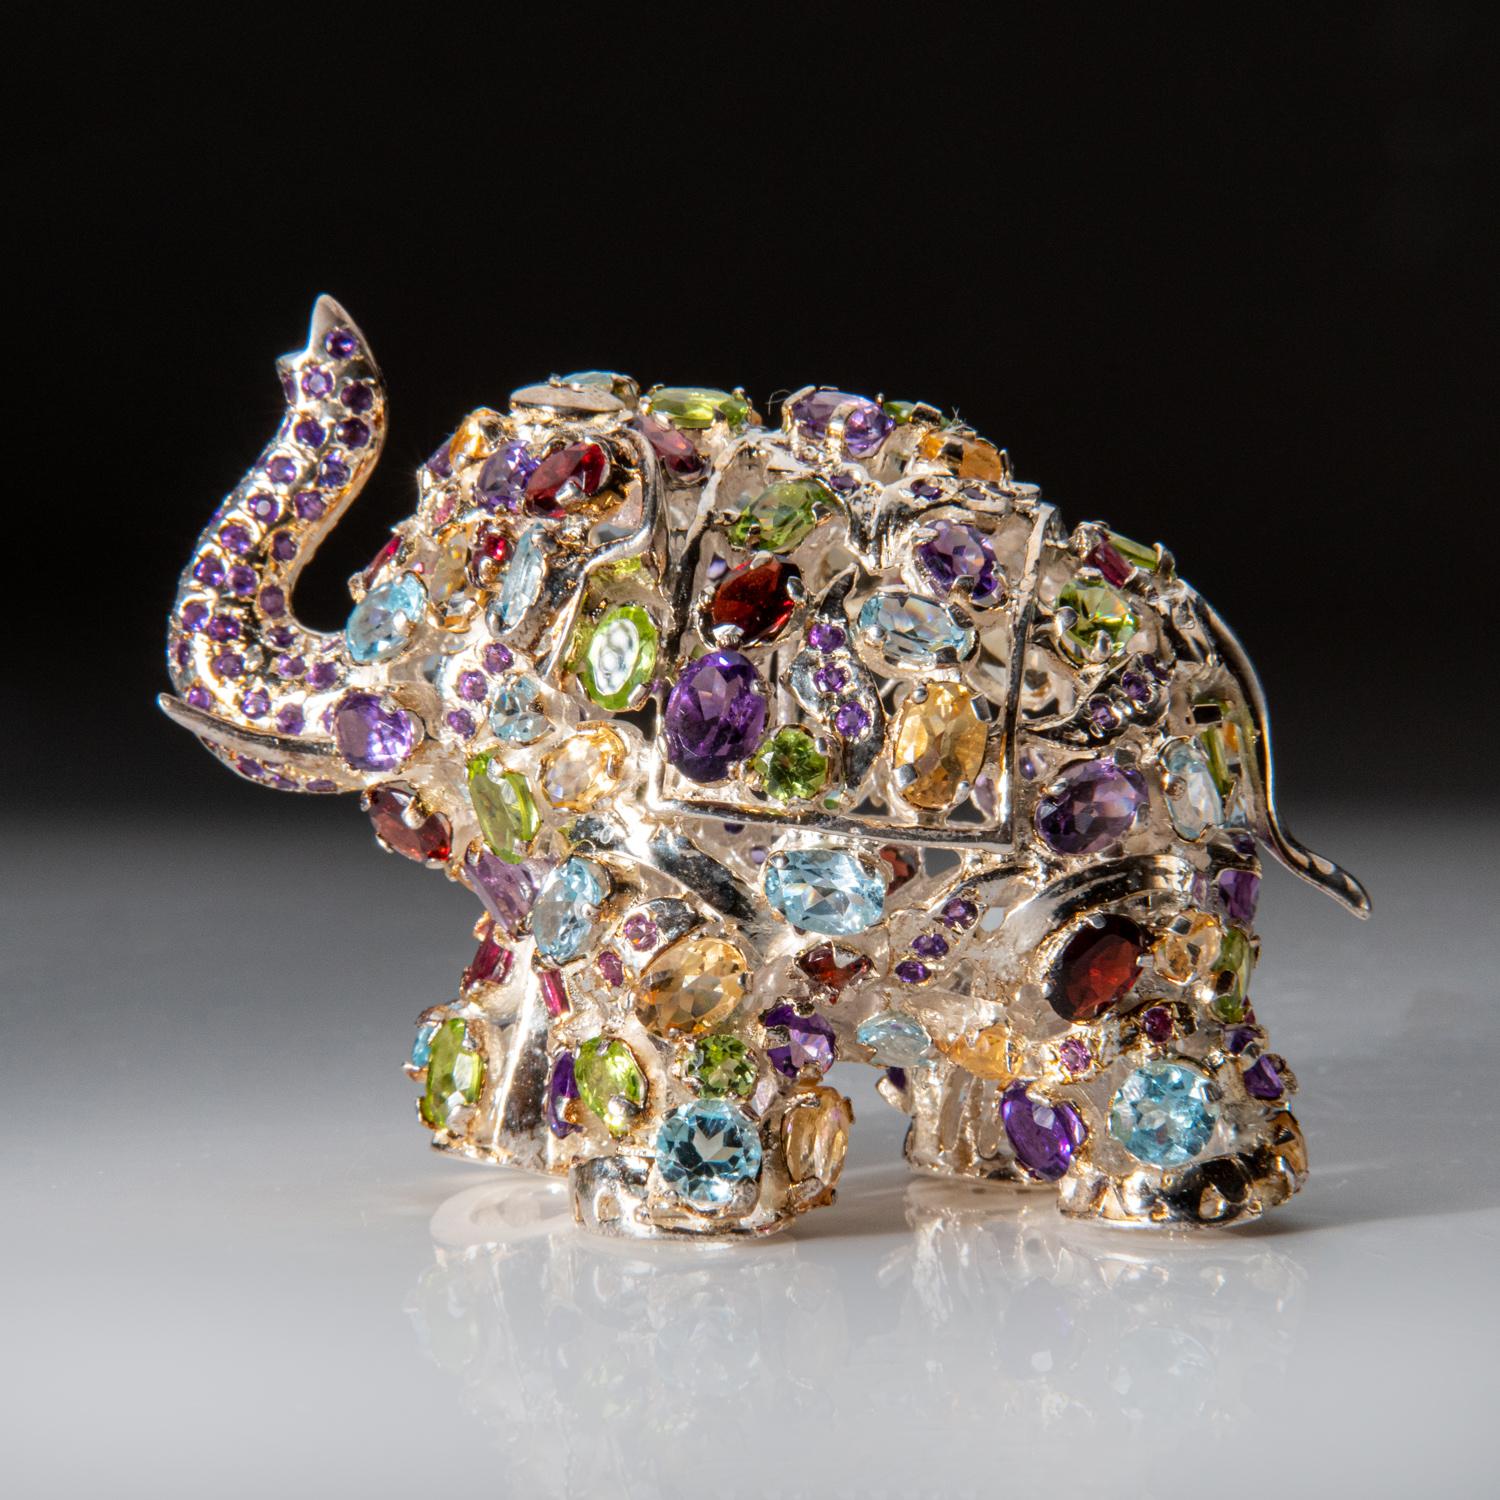 This unique Sterling Silver Elephant carving is handcrafted in India. Made with genuine sterling silver, it is sprinkled with precious gemstones including red garnet, paridot, amethyst, citrine, and blue topaz for a luxurious touch. A perfect and